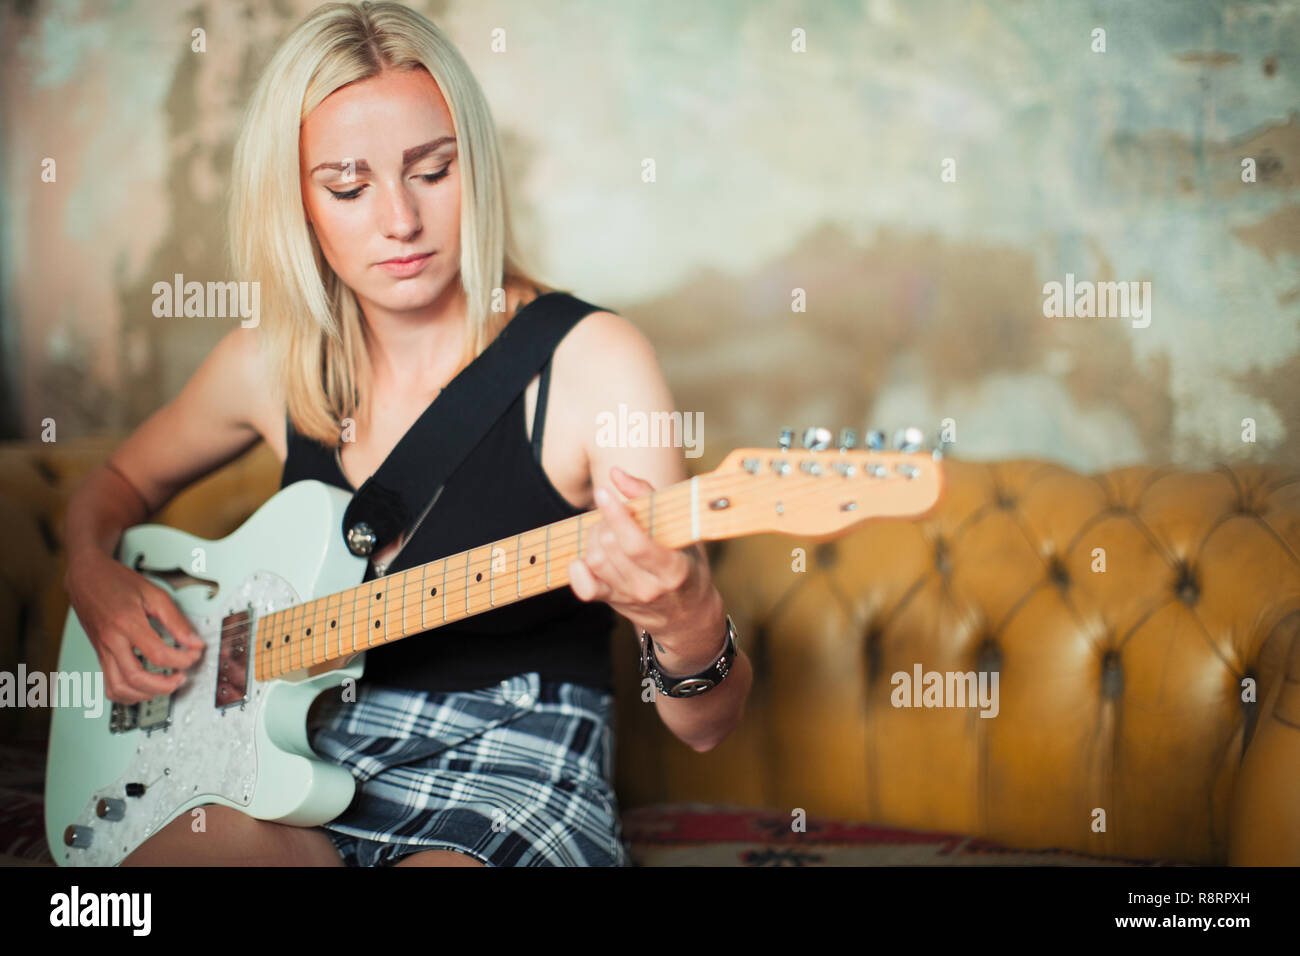 Young woman playing electric guitar on sofa Stock Photo